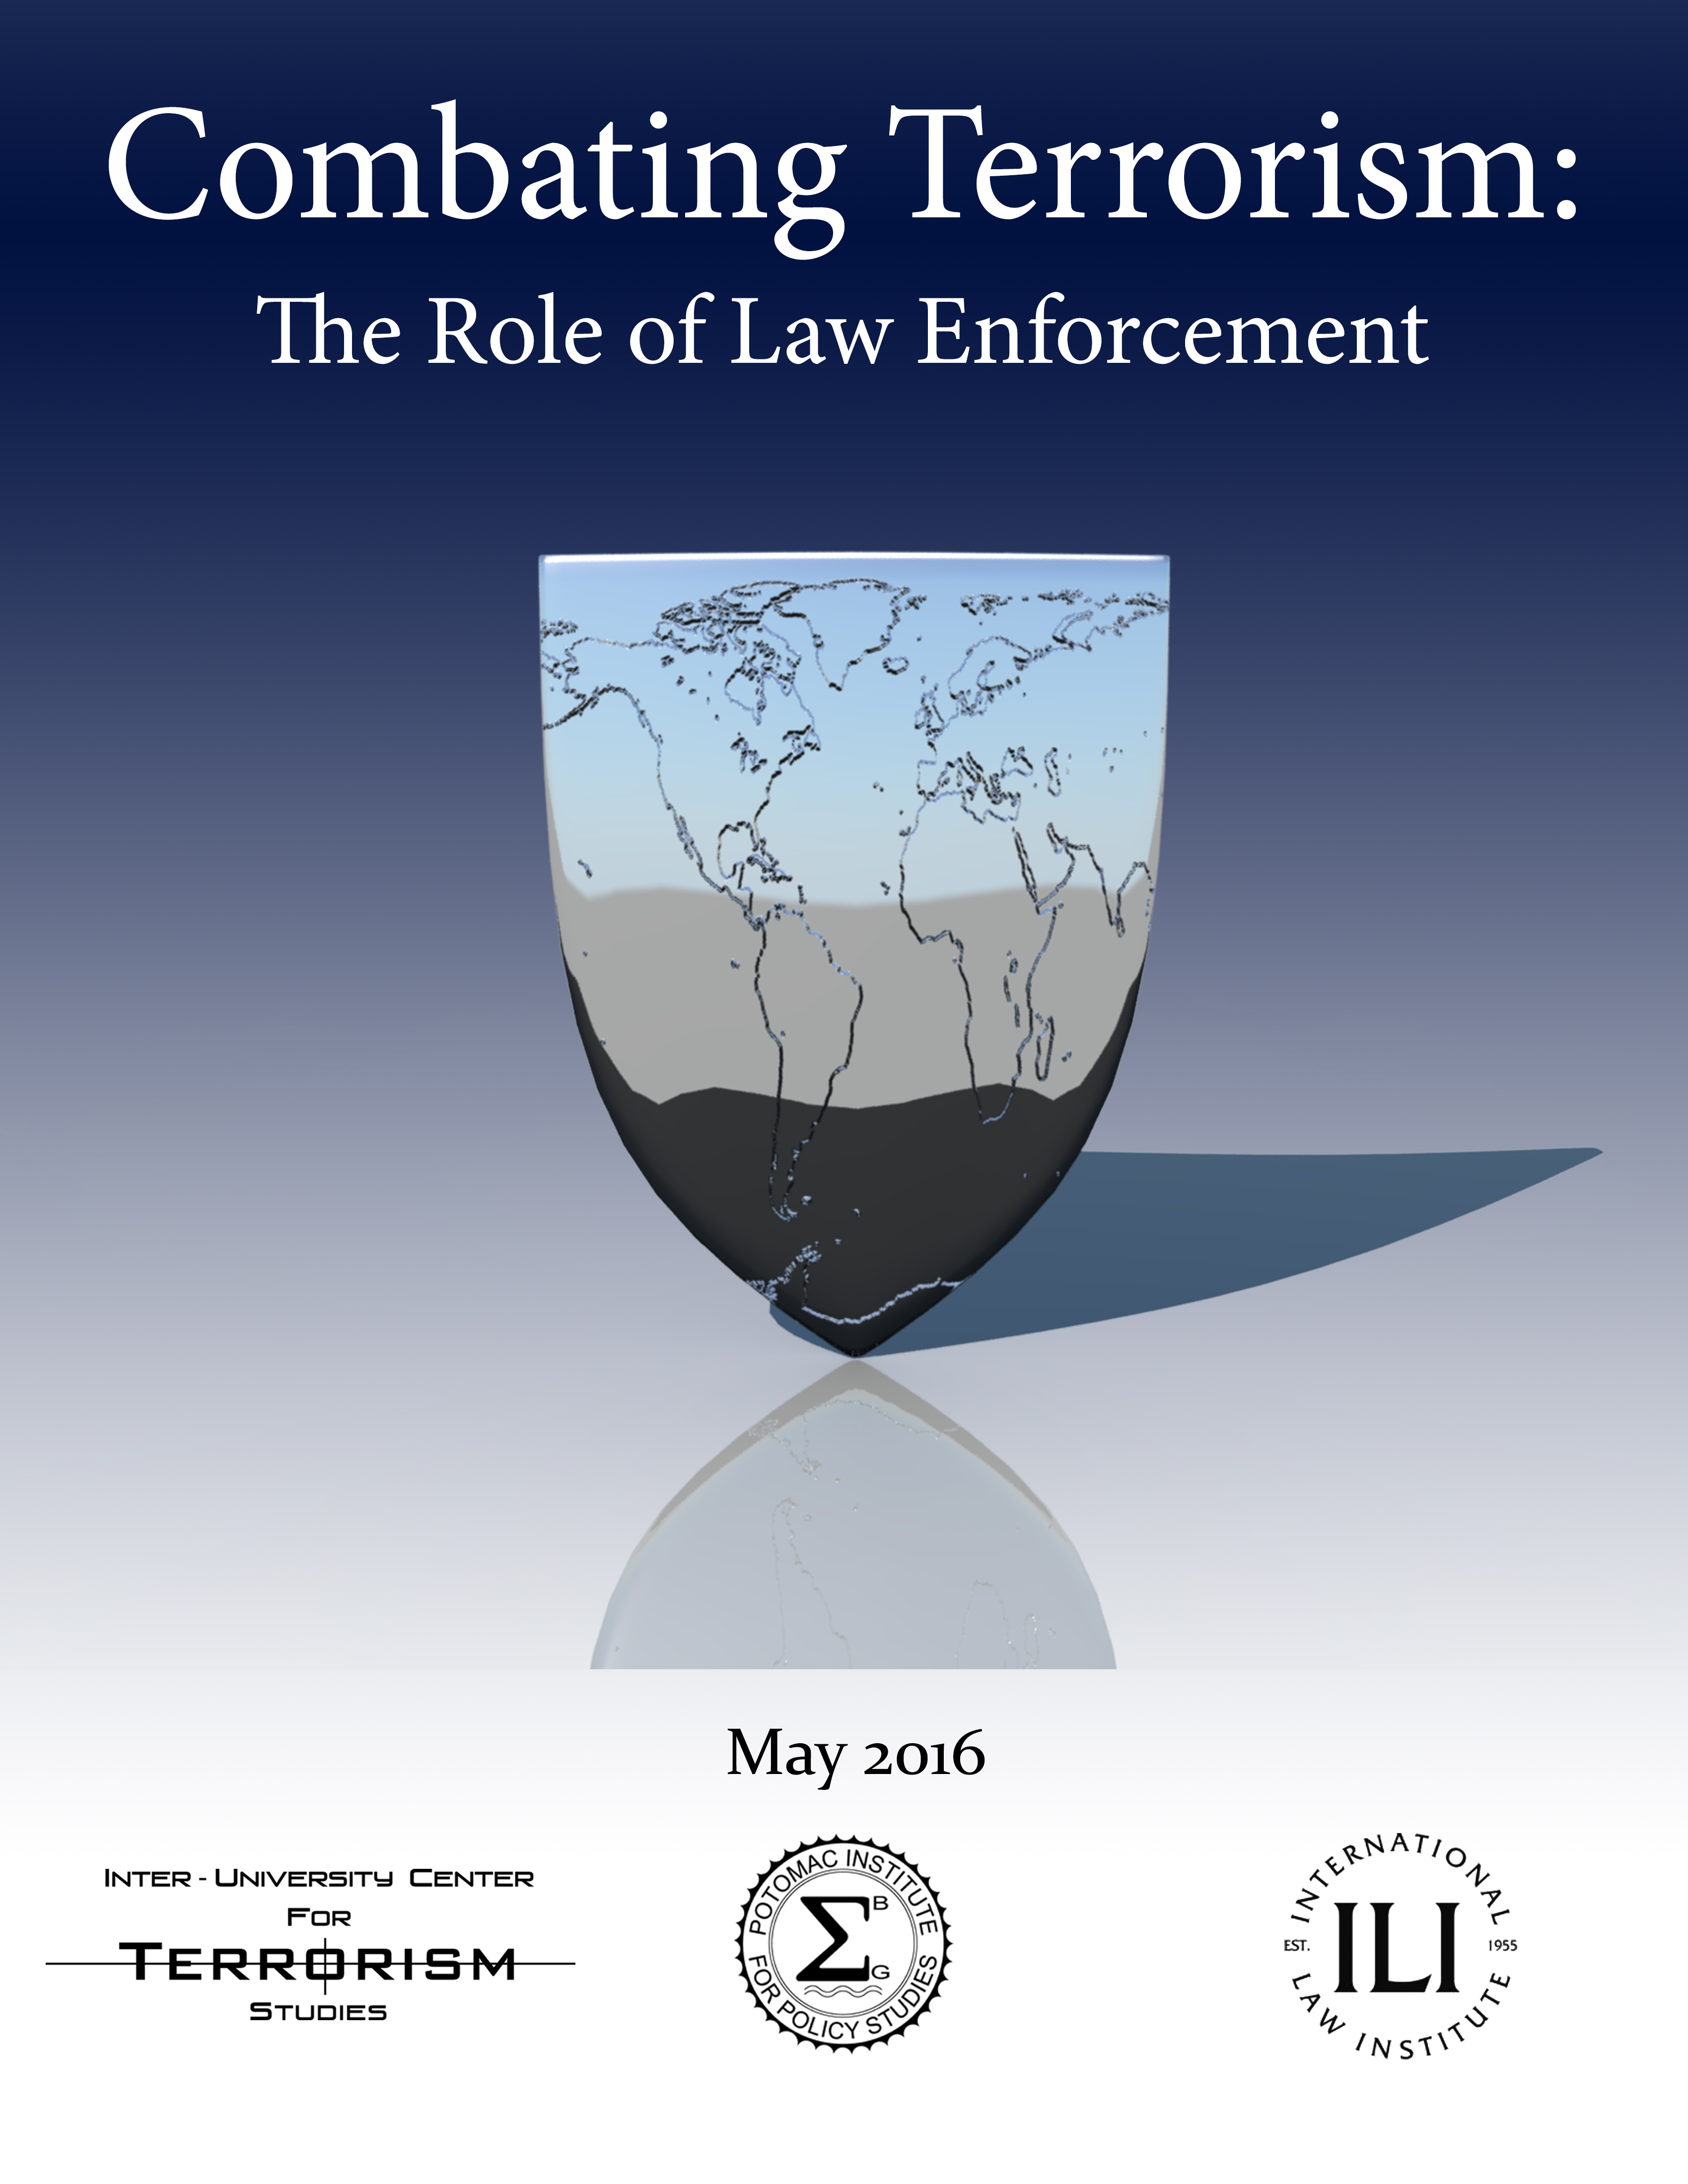 Combating Terrorism: The Role of Law Enforcement